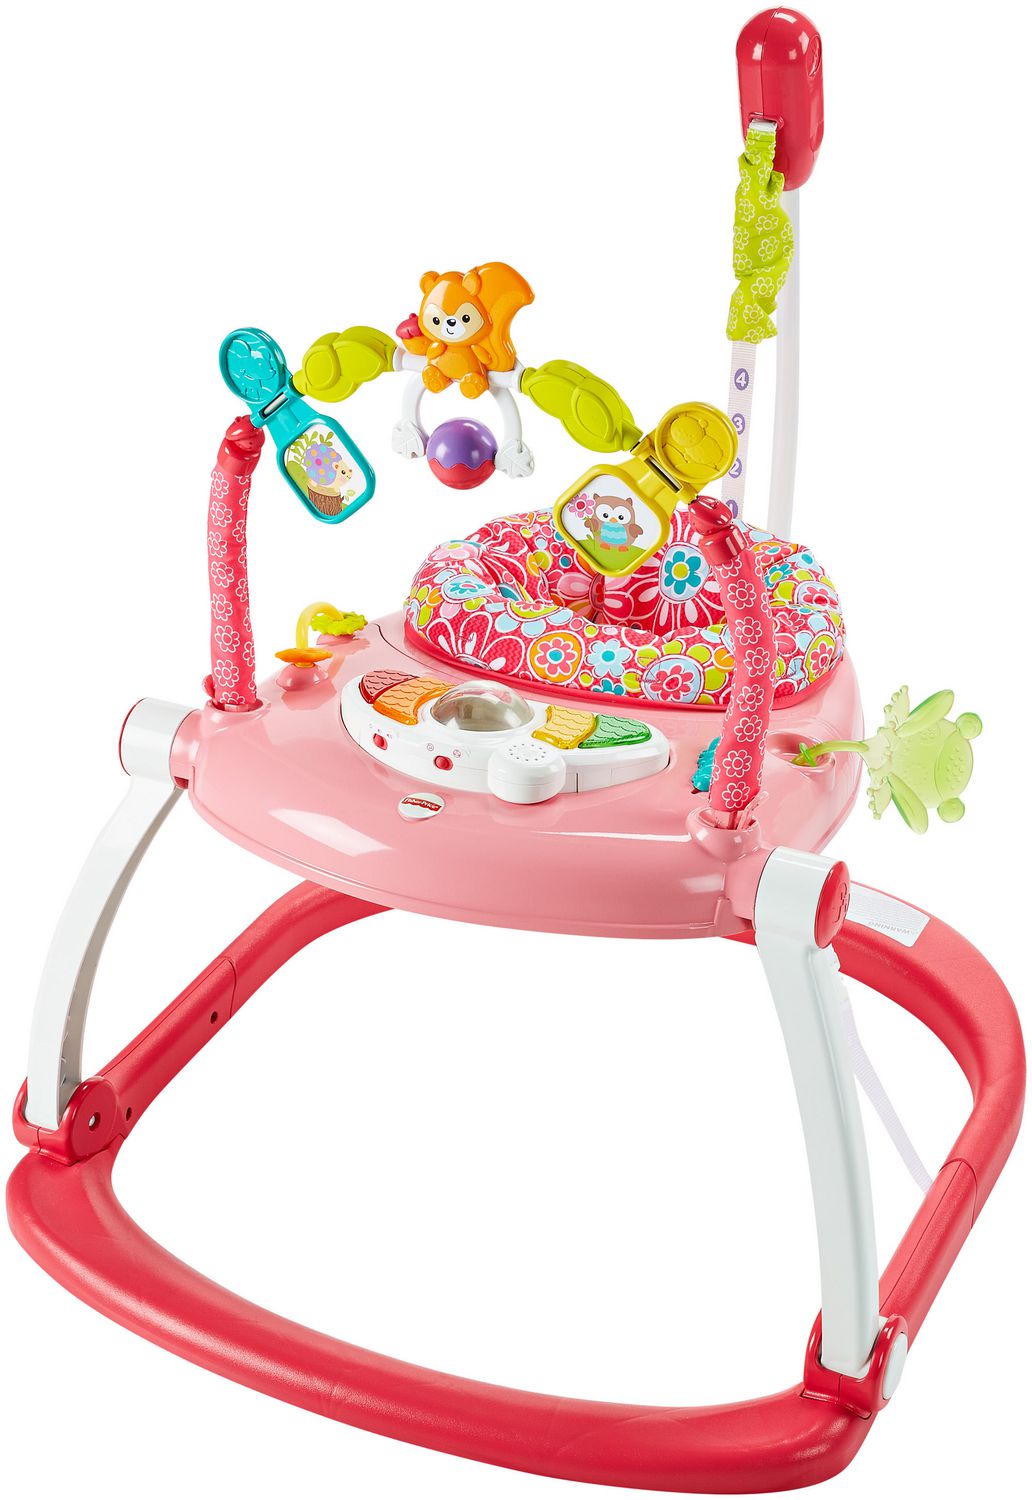 floral confetti spacesaver jumperoo